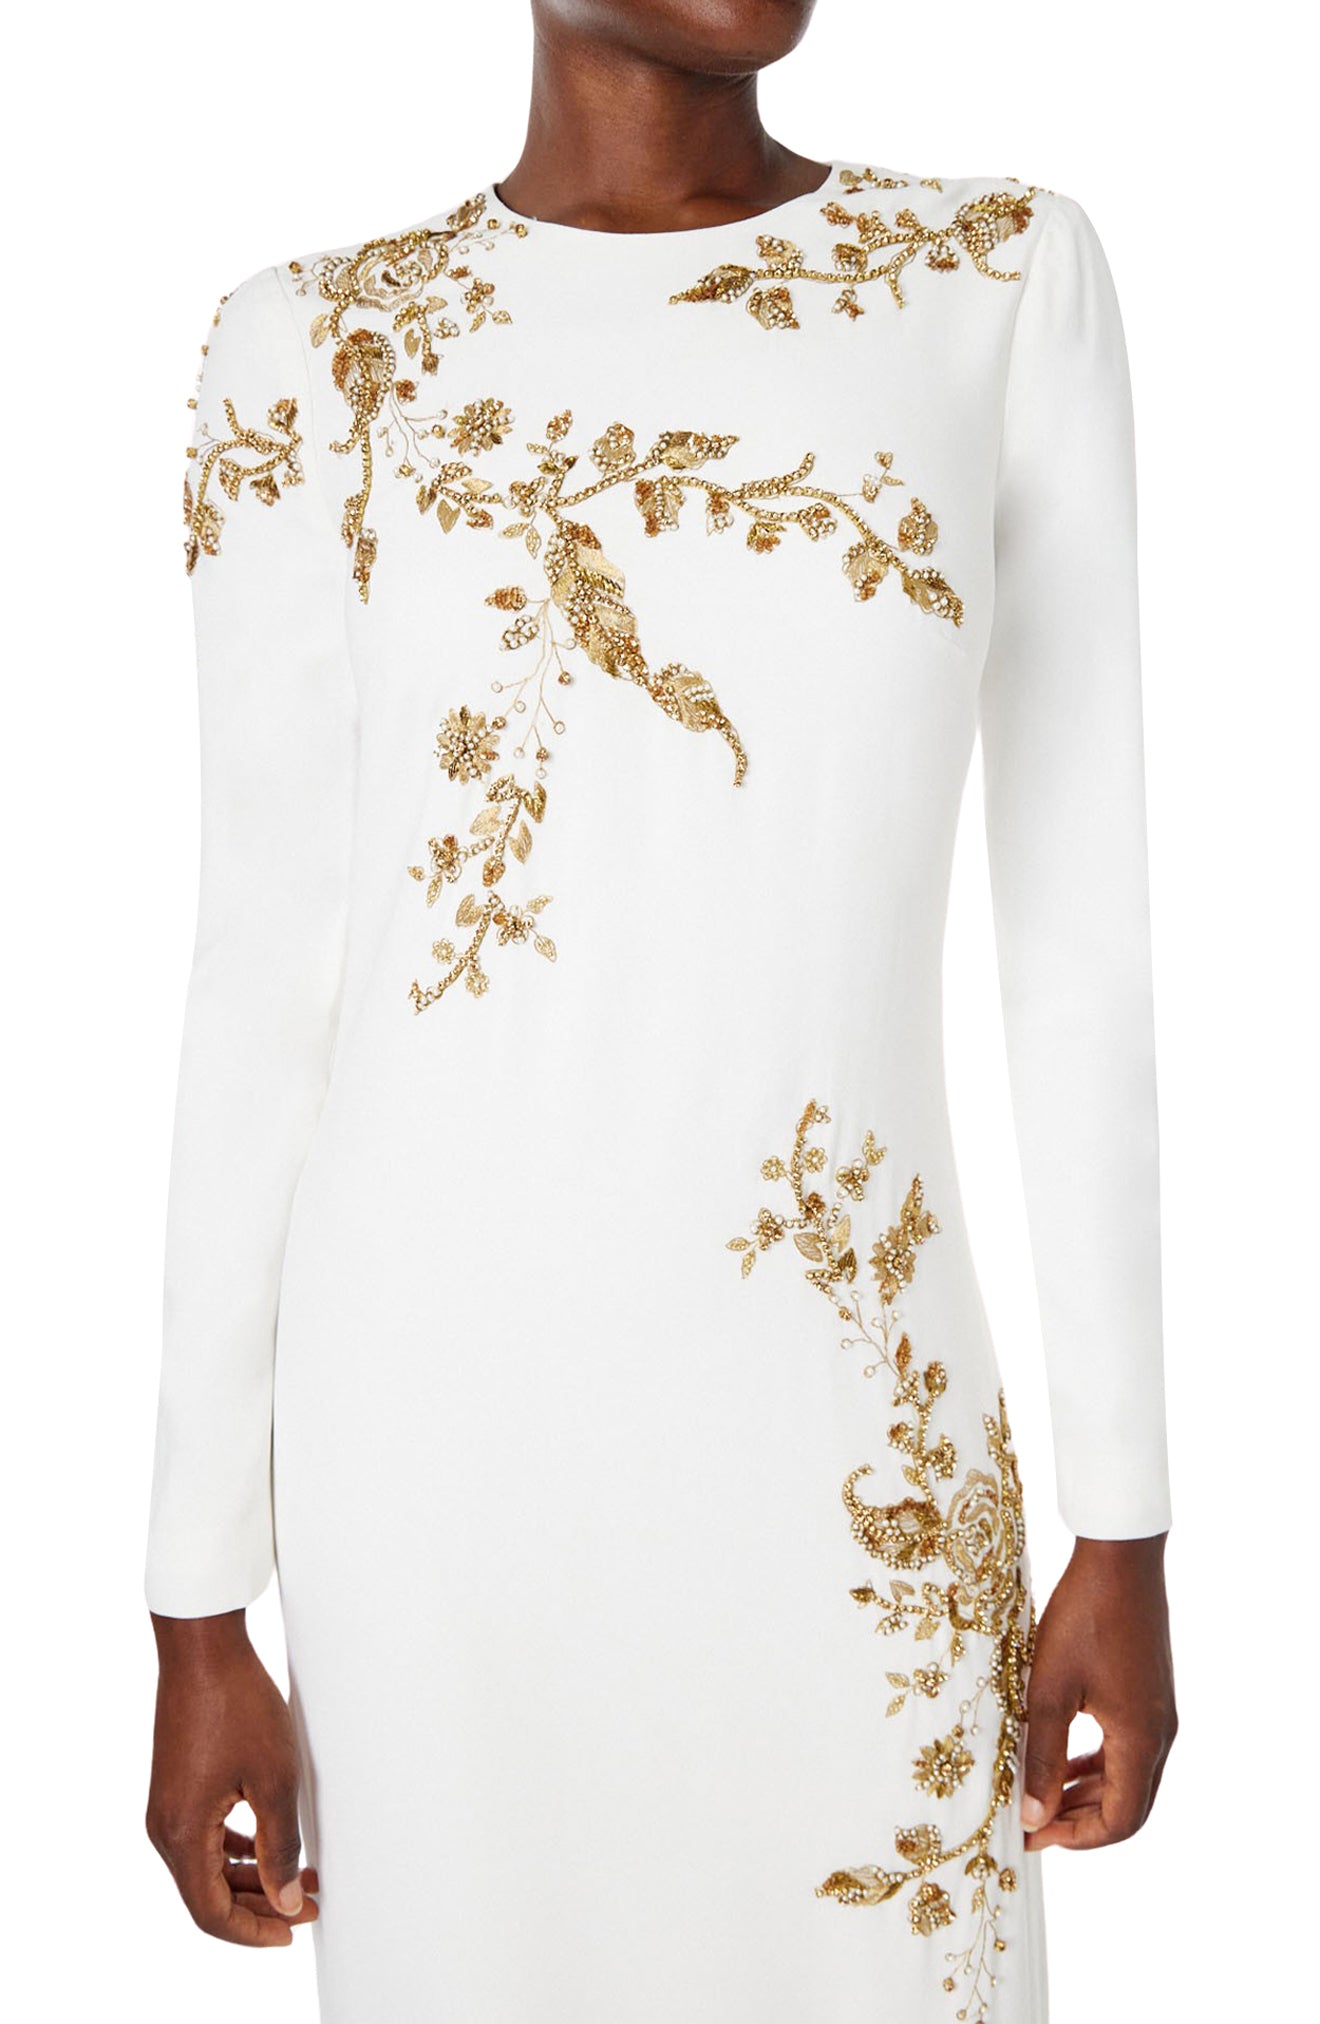 Monique Lhuillier silk white jewel neck, long sleeve column gown with gold embroidery.